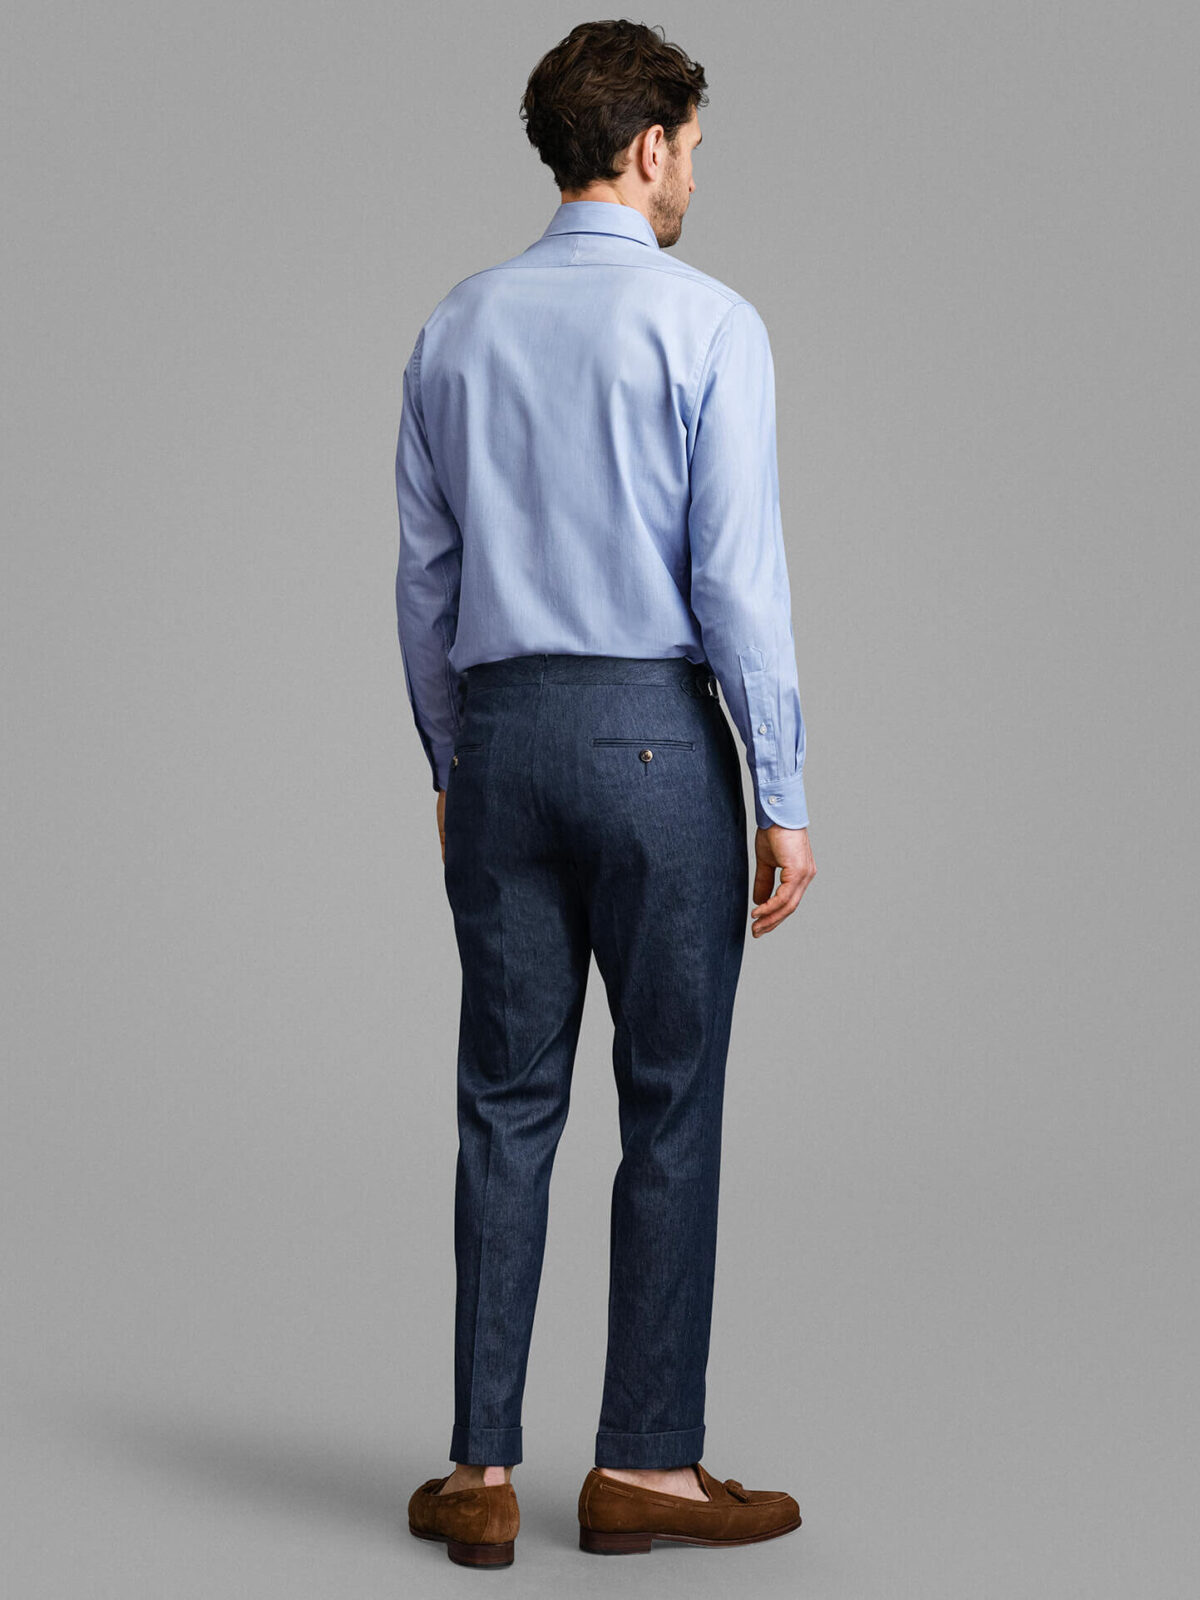 Loro Piana Fabric Navy Stretch Cotton and Linen Dress Pant - Custom Fit  Tailored Clothing